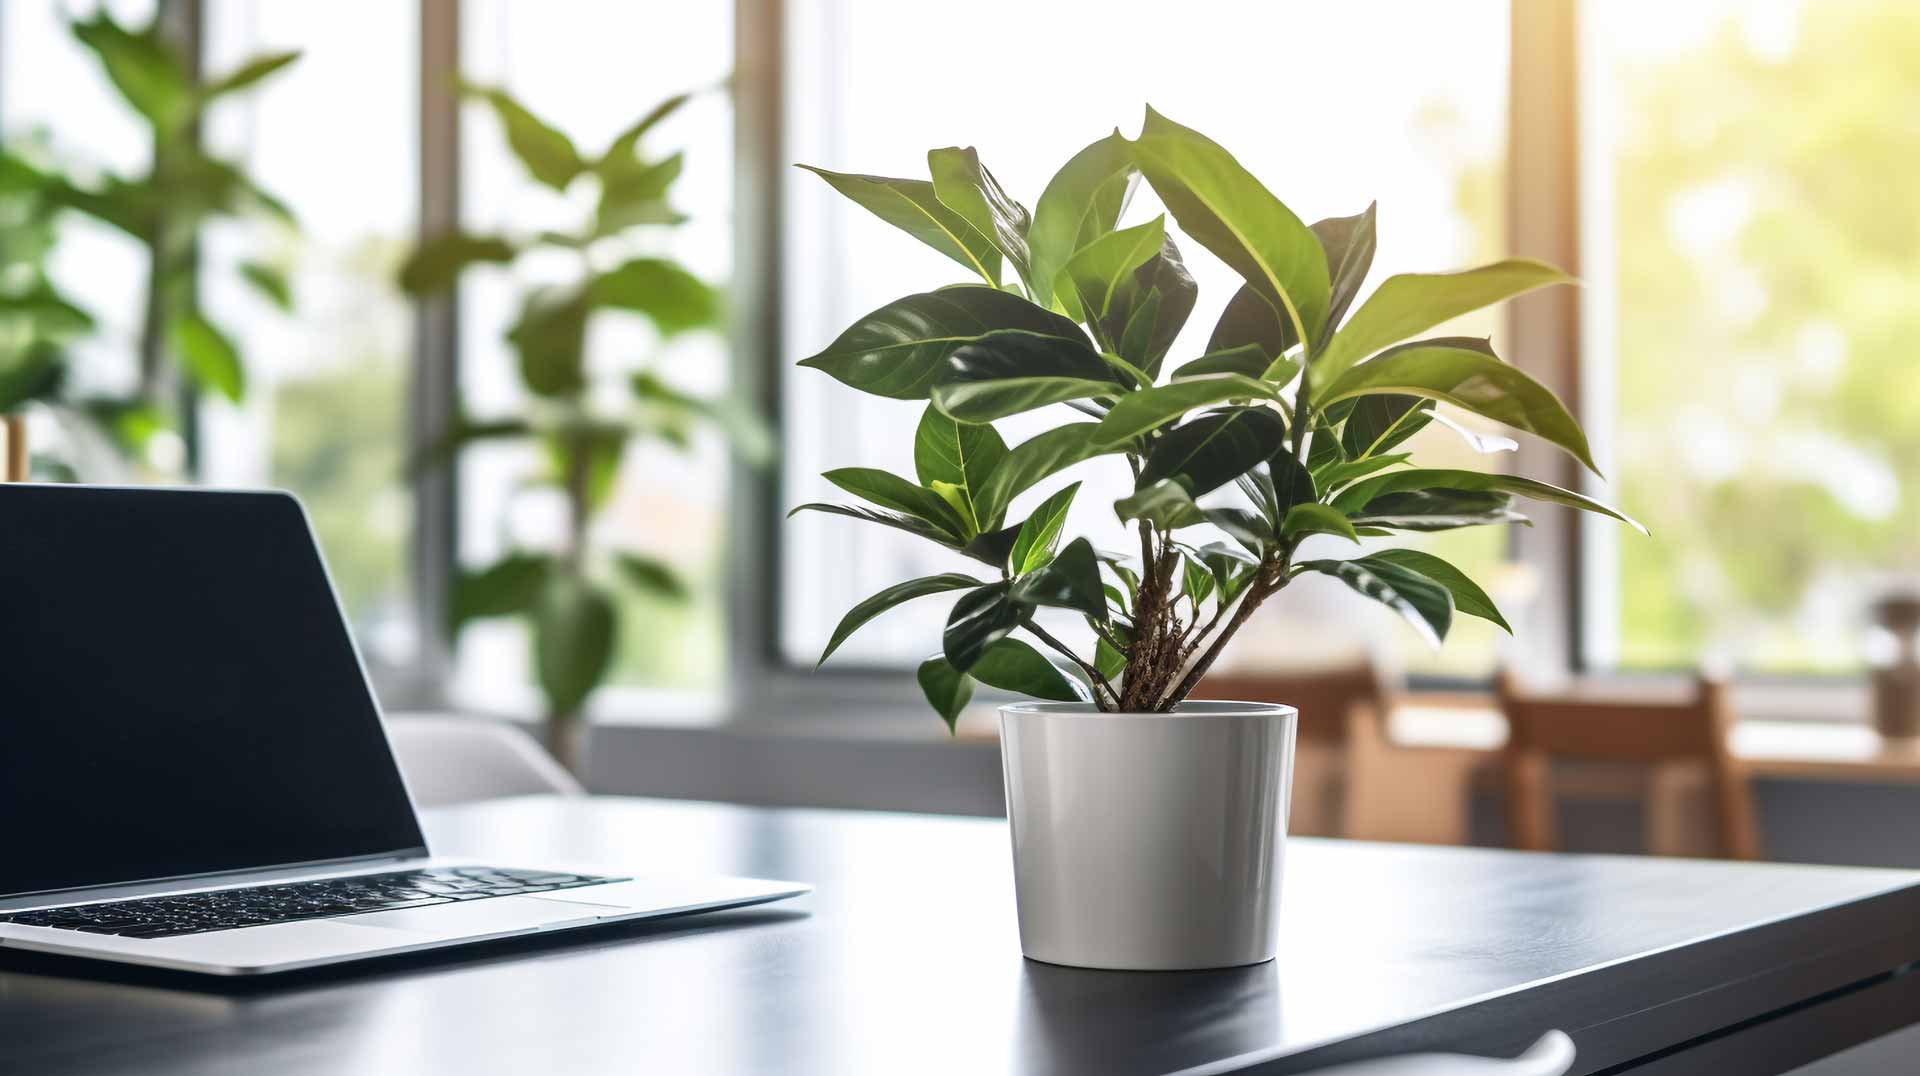 Clean office space with many plants